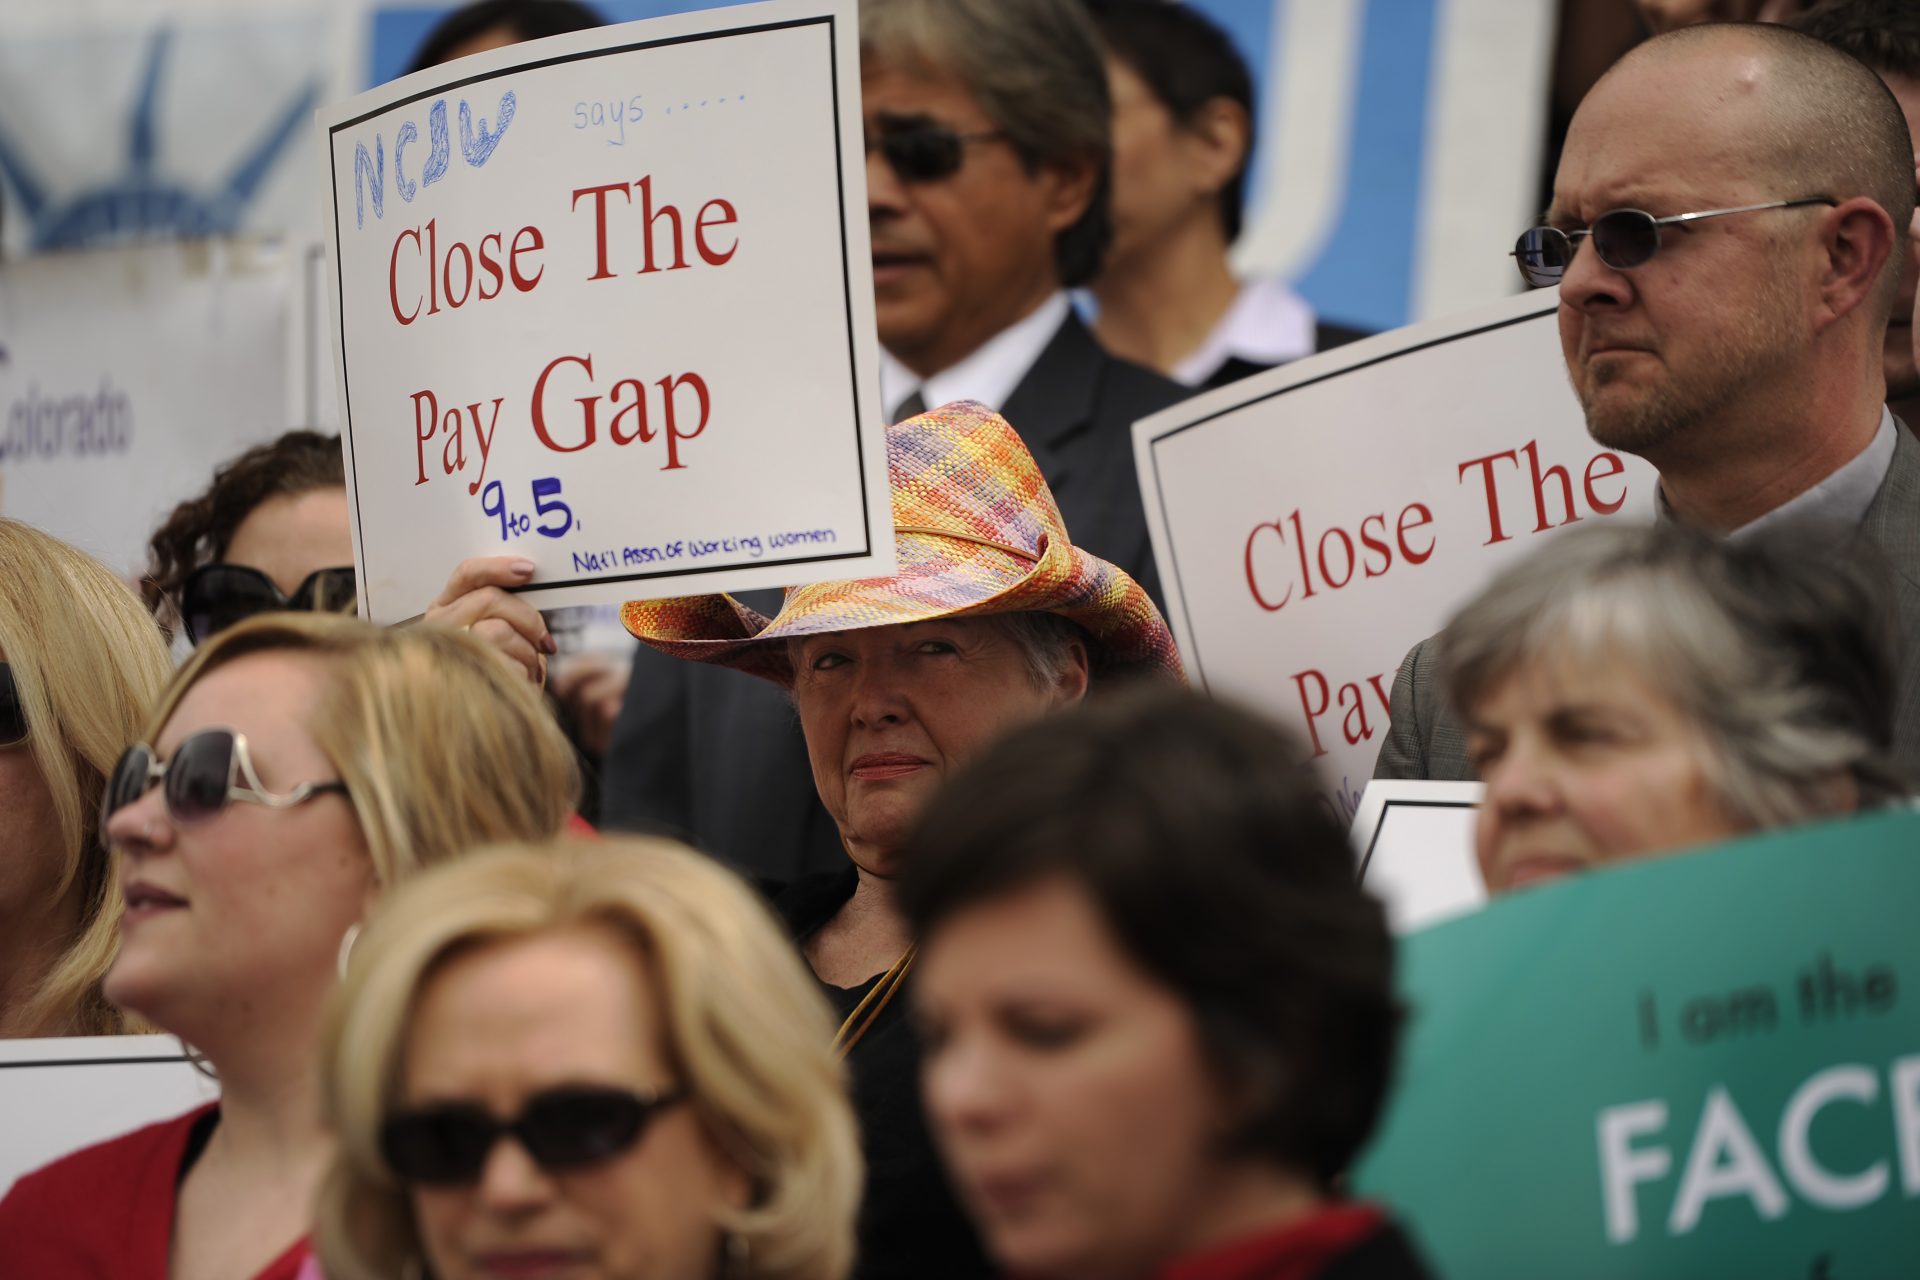 The gender pay gap is worsening in the US